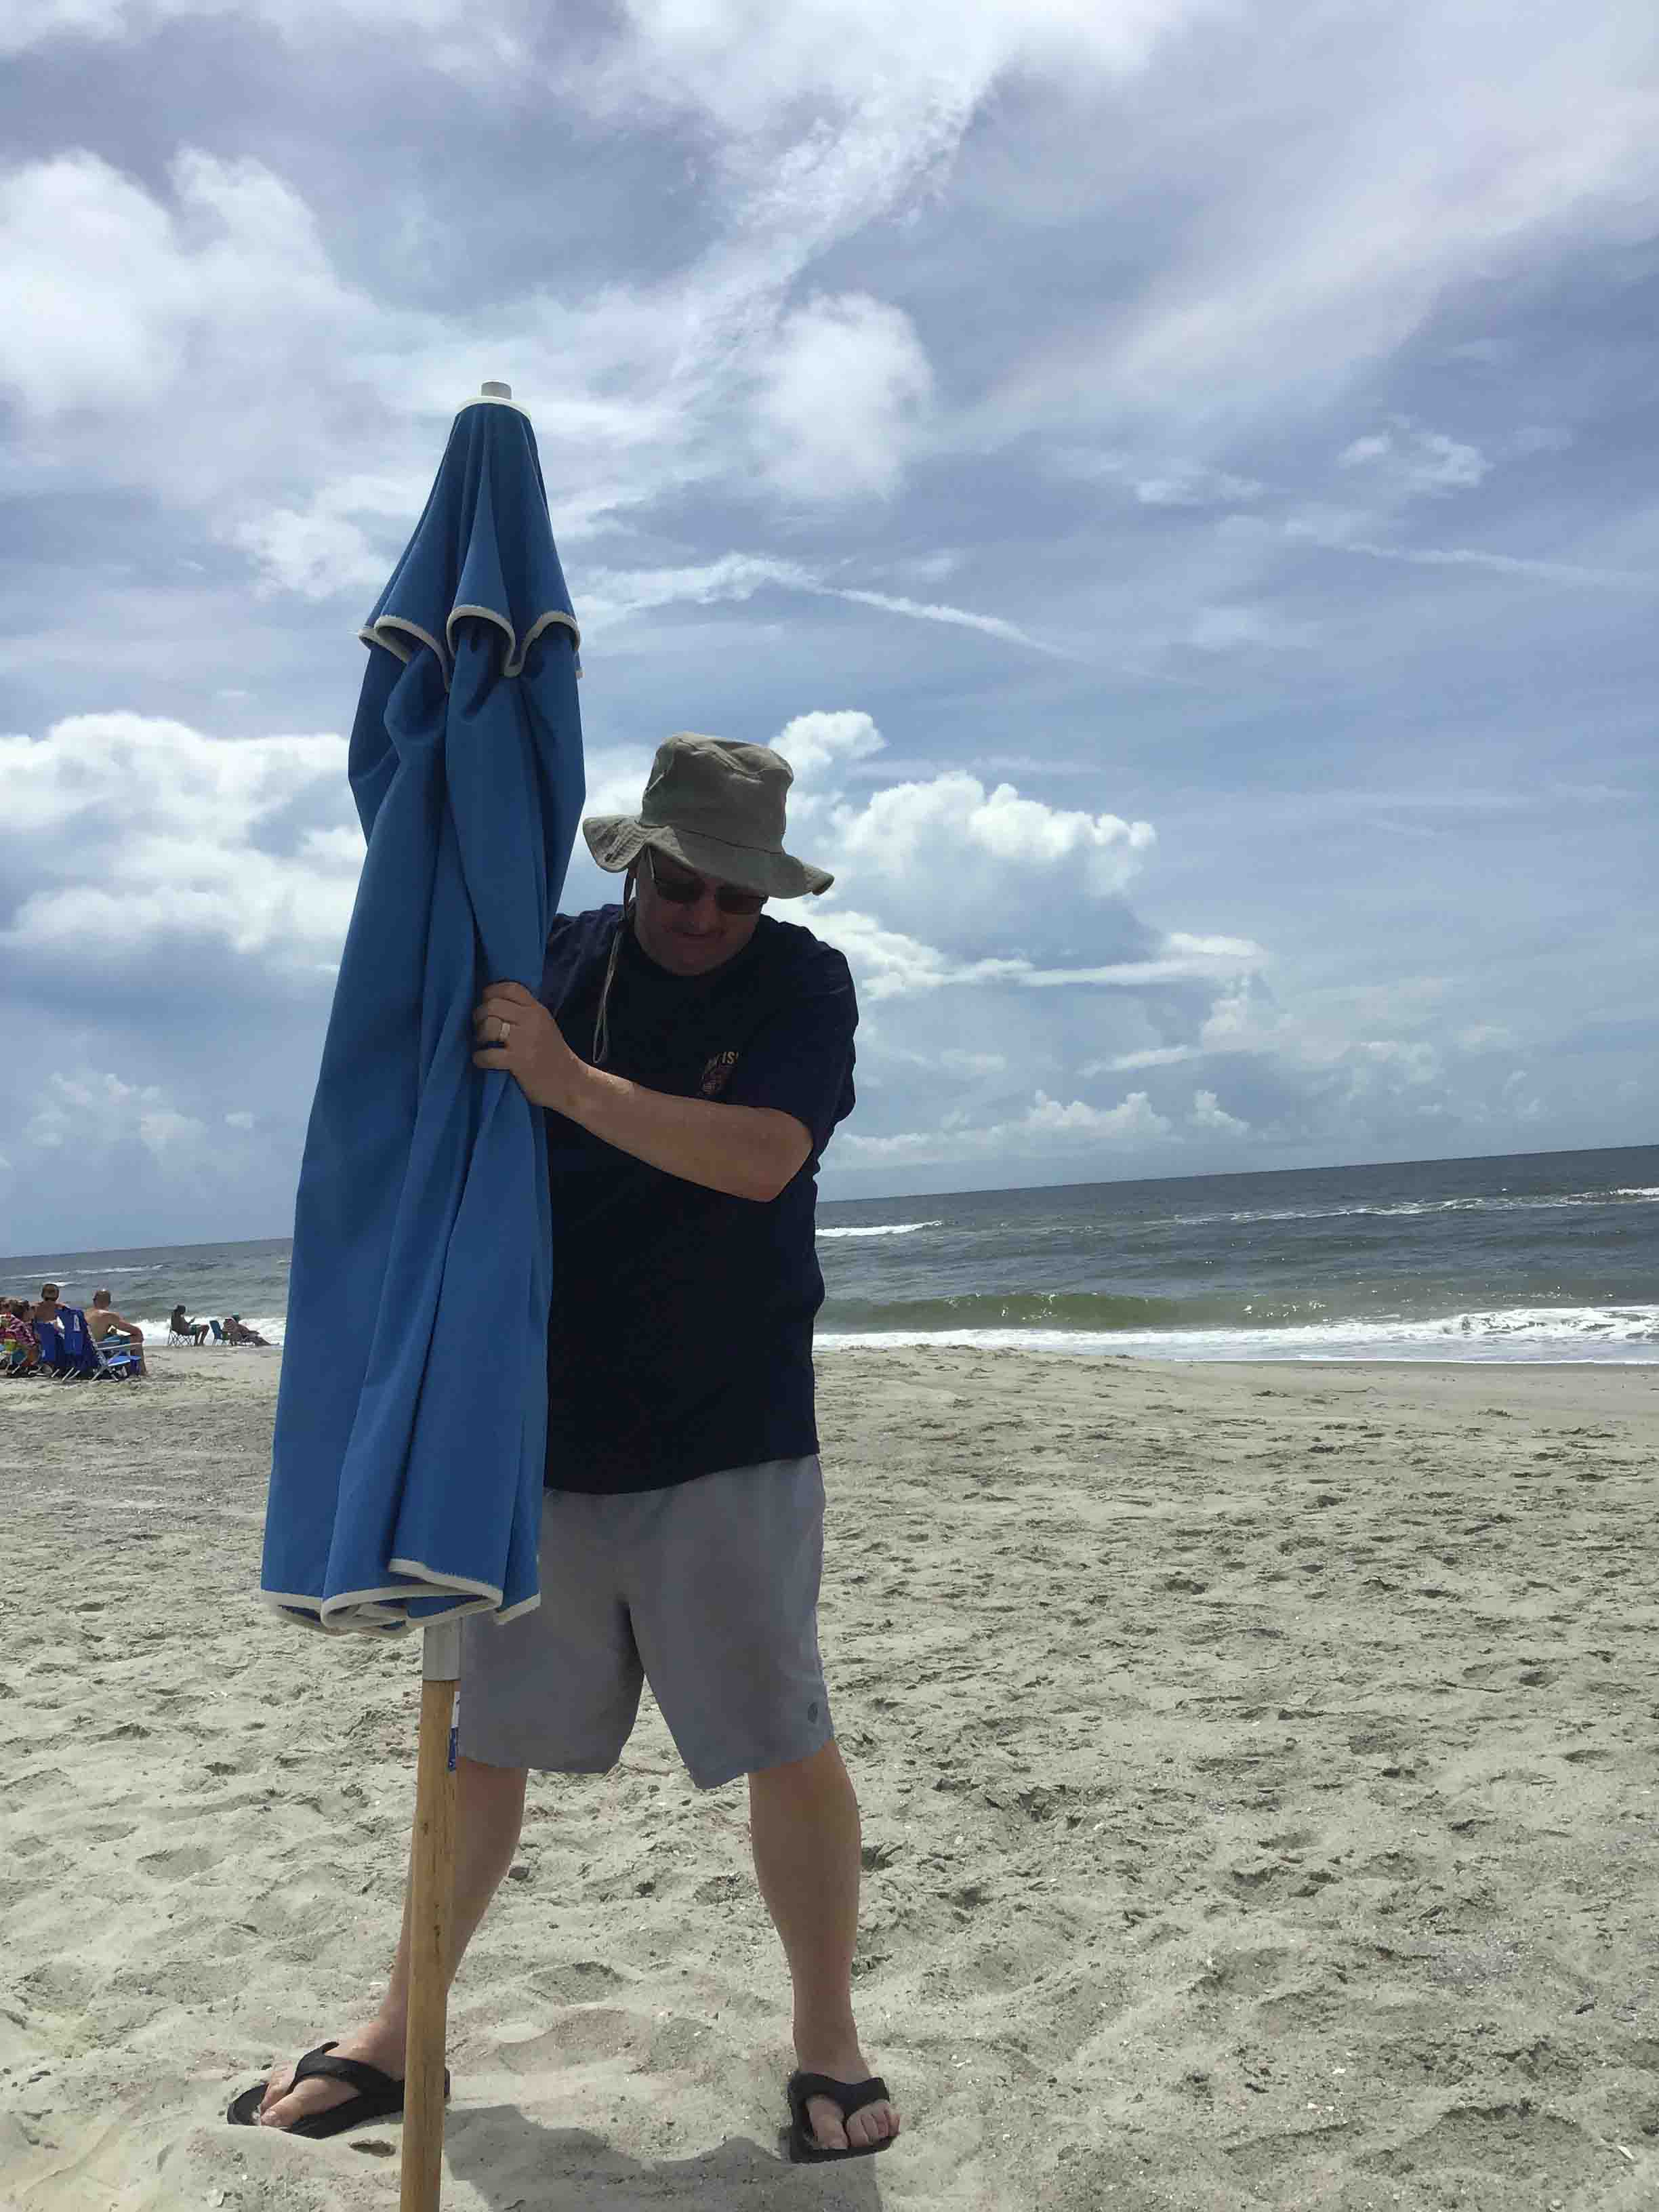 Gene Curtis is an old hand at putting up the umbrella!                             Location:  Sandpiper Cottage, Oak Island, NC                                 Source: Julane Crabtree                                Date: 28 Jul 2023